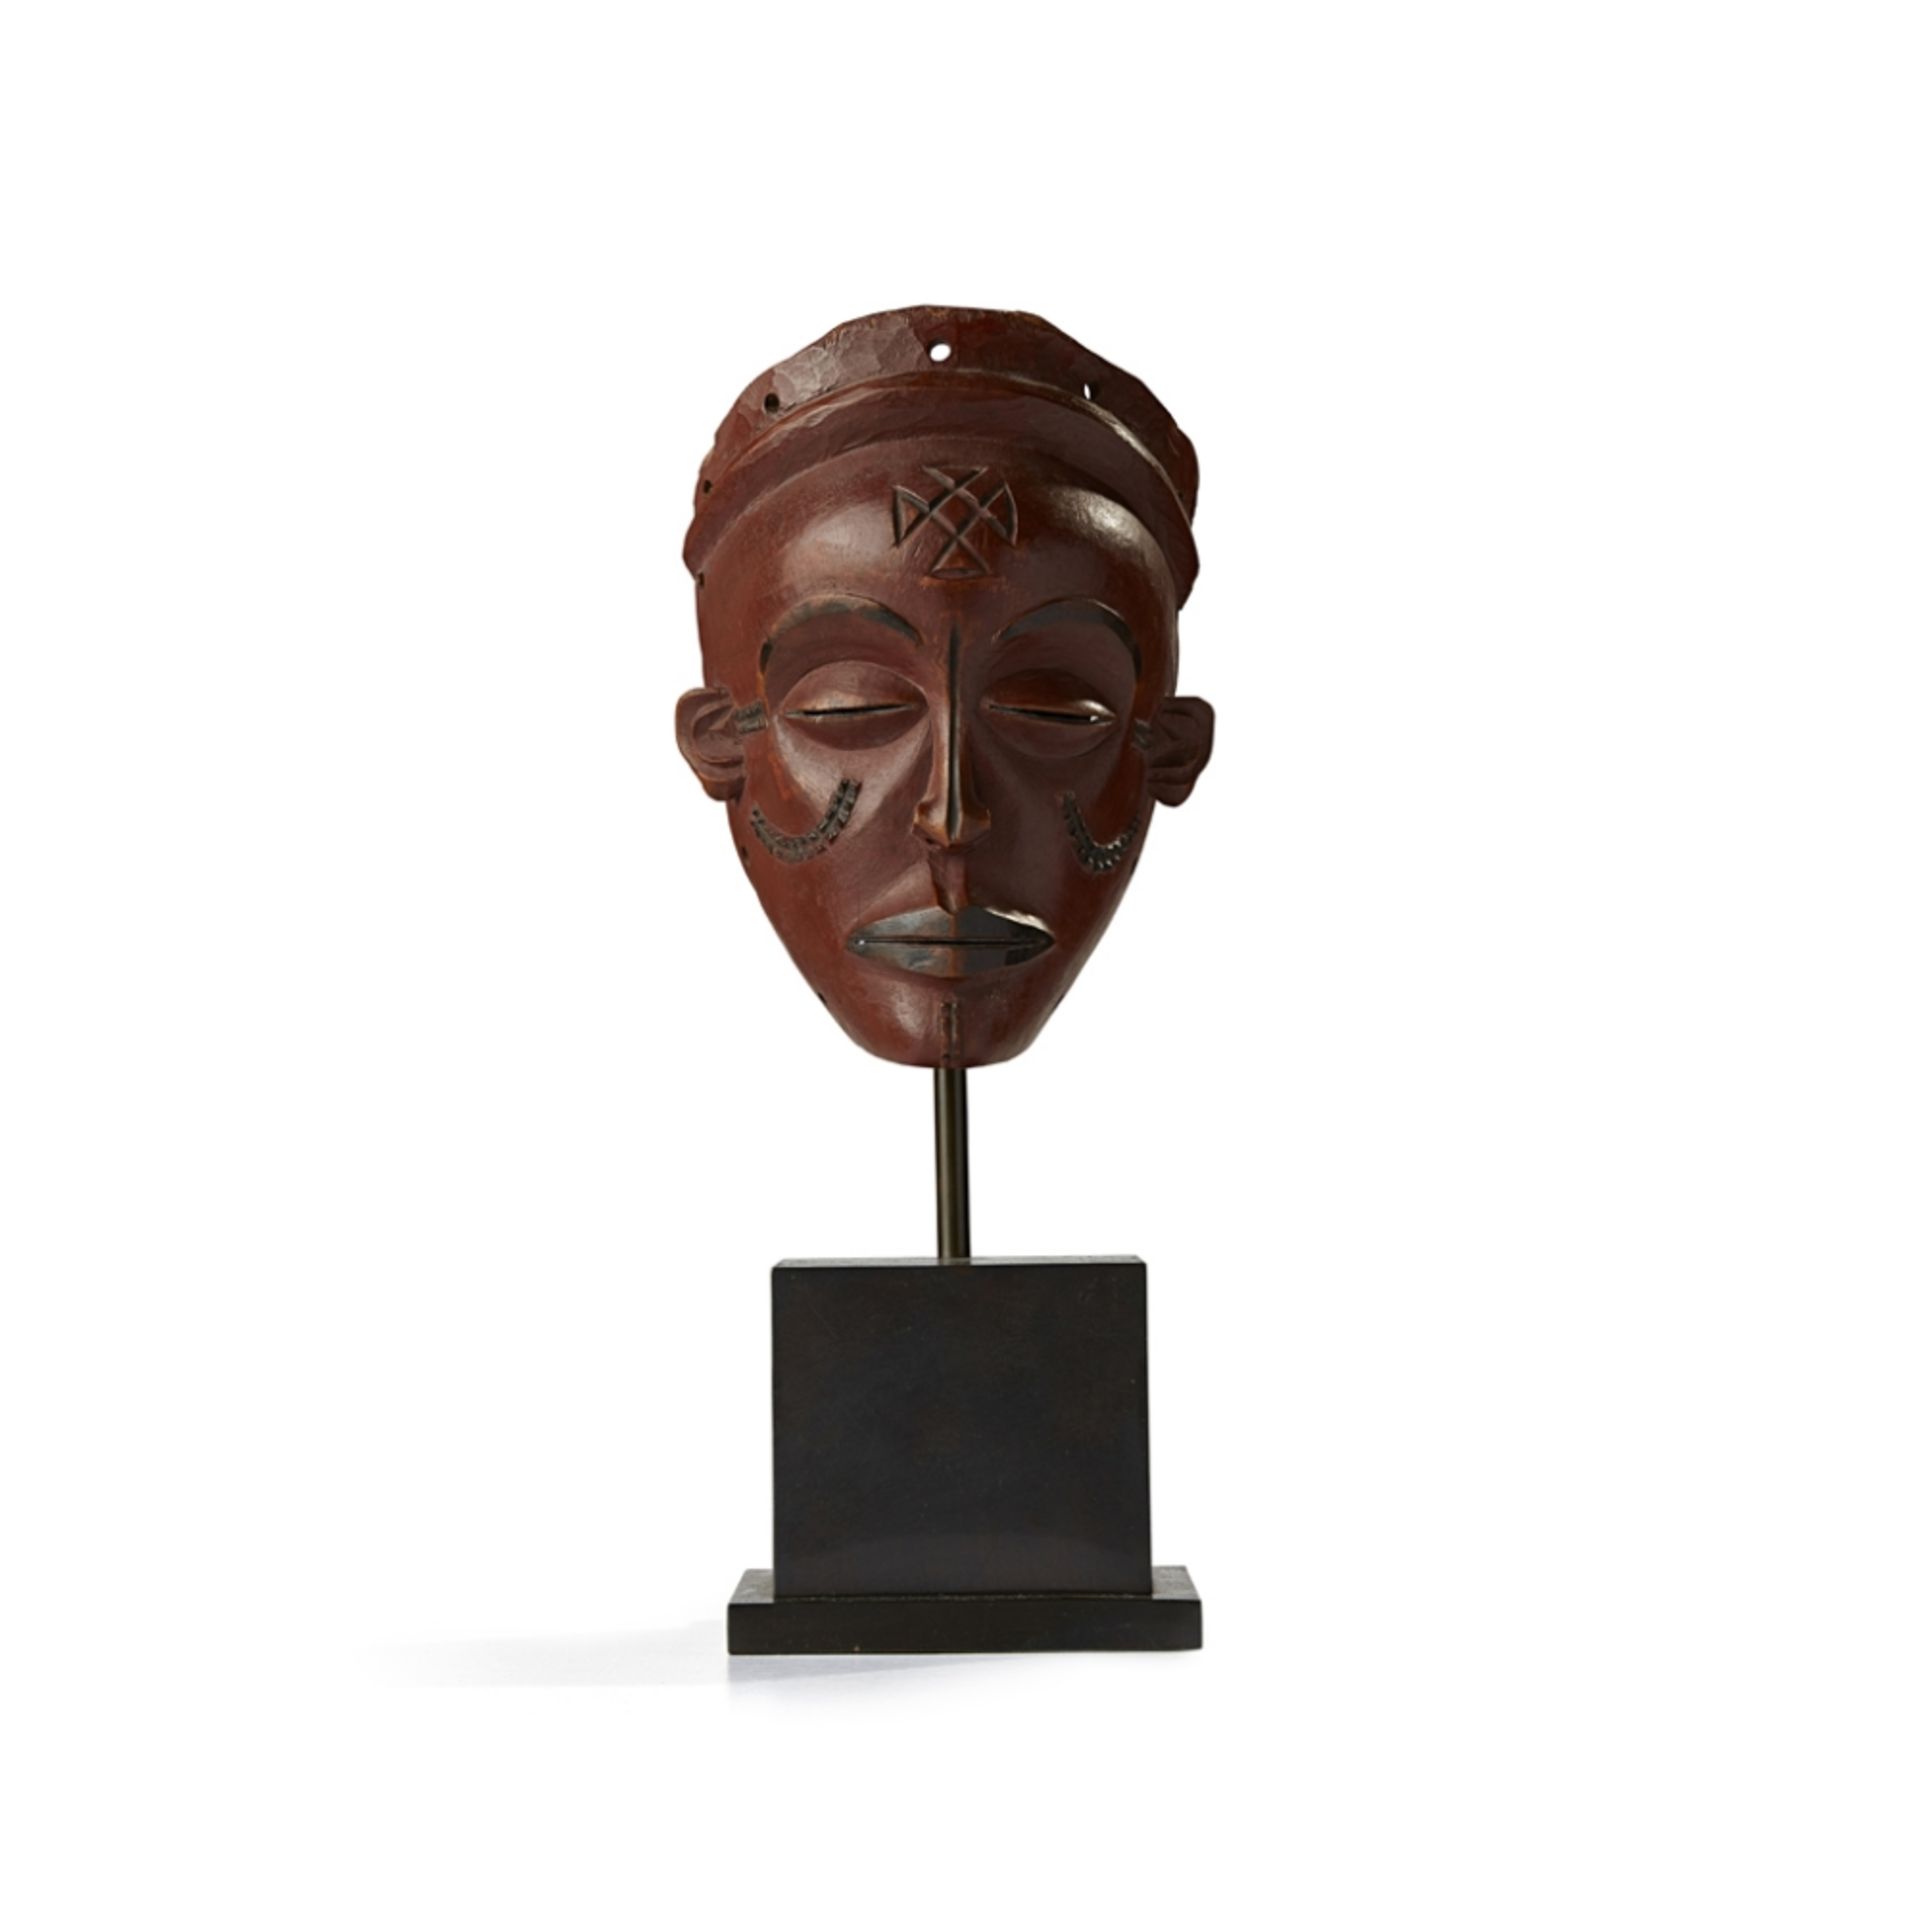 CHOKWE MASK, PWOANGOLA carved wood, the softly curving chin below fractionally parted lips, a medial